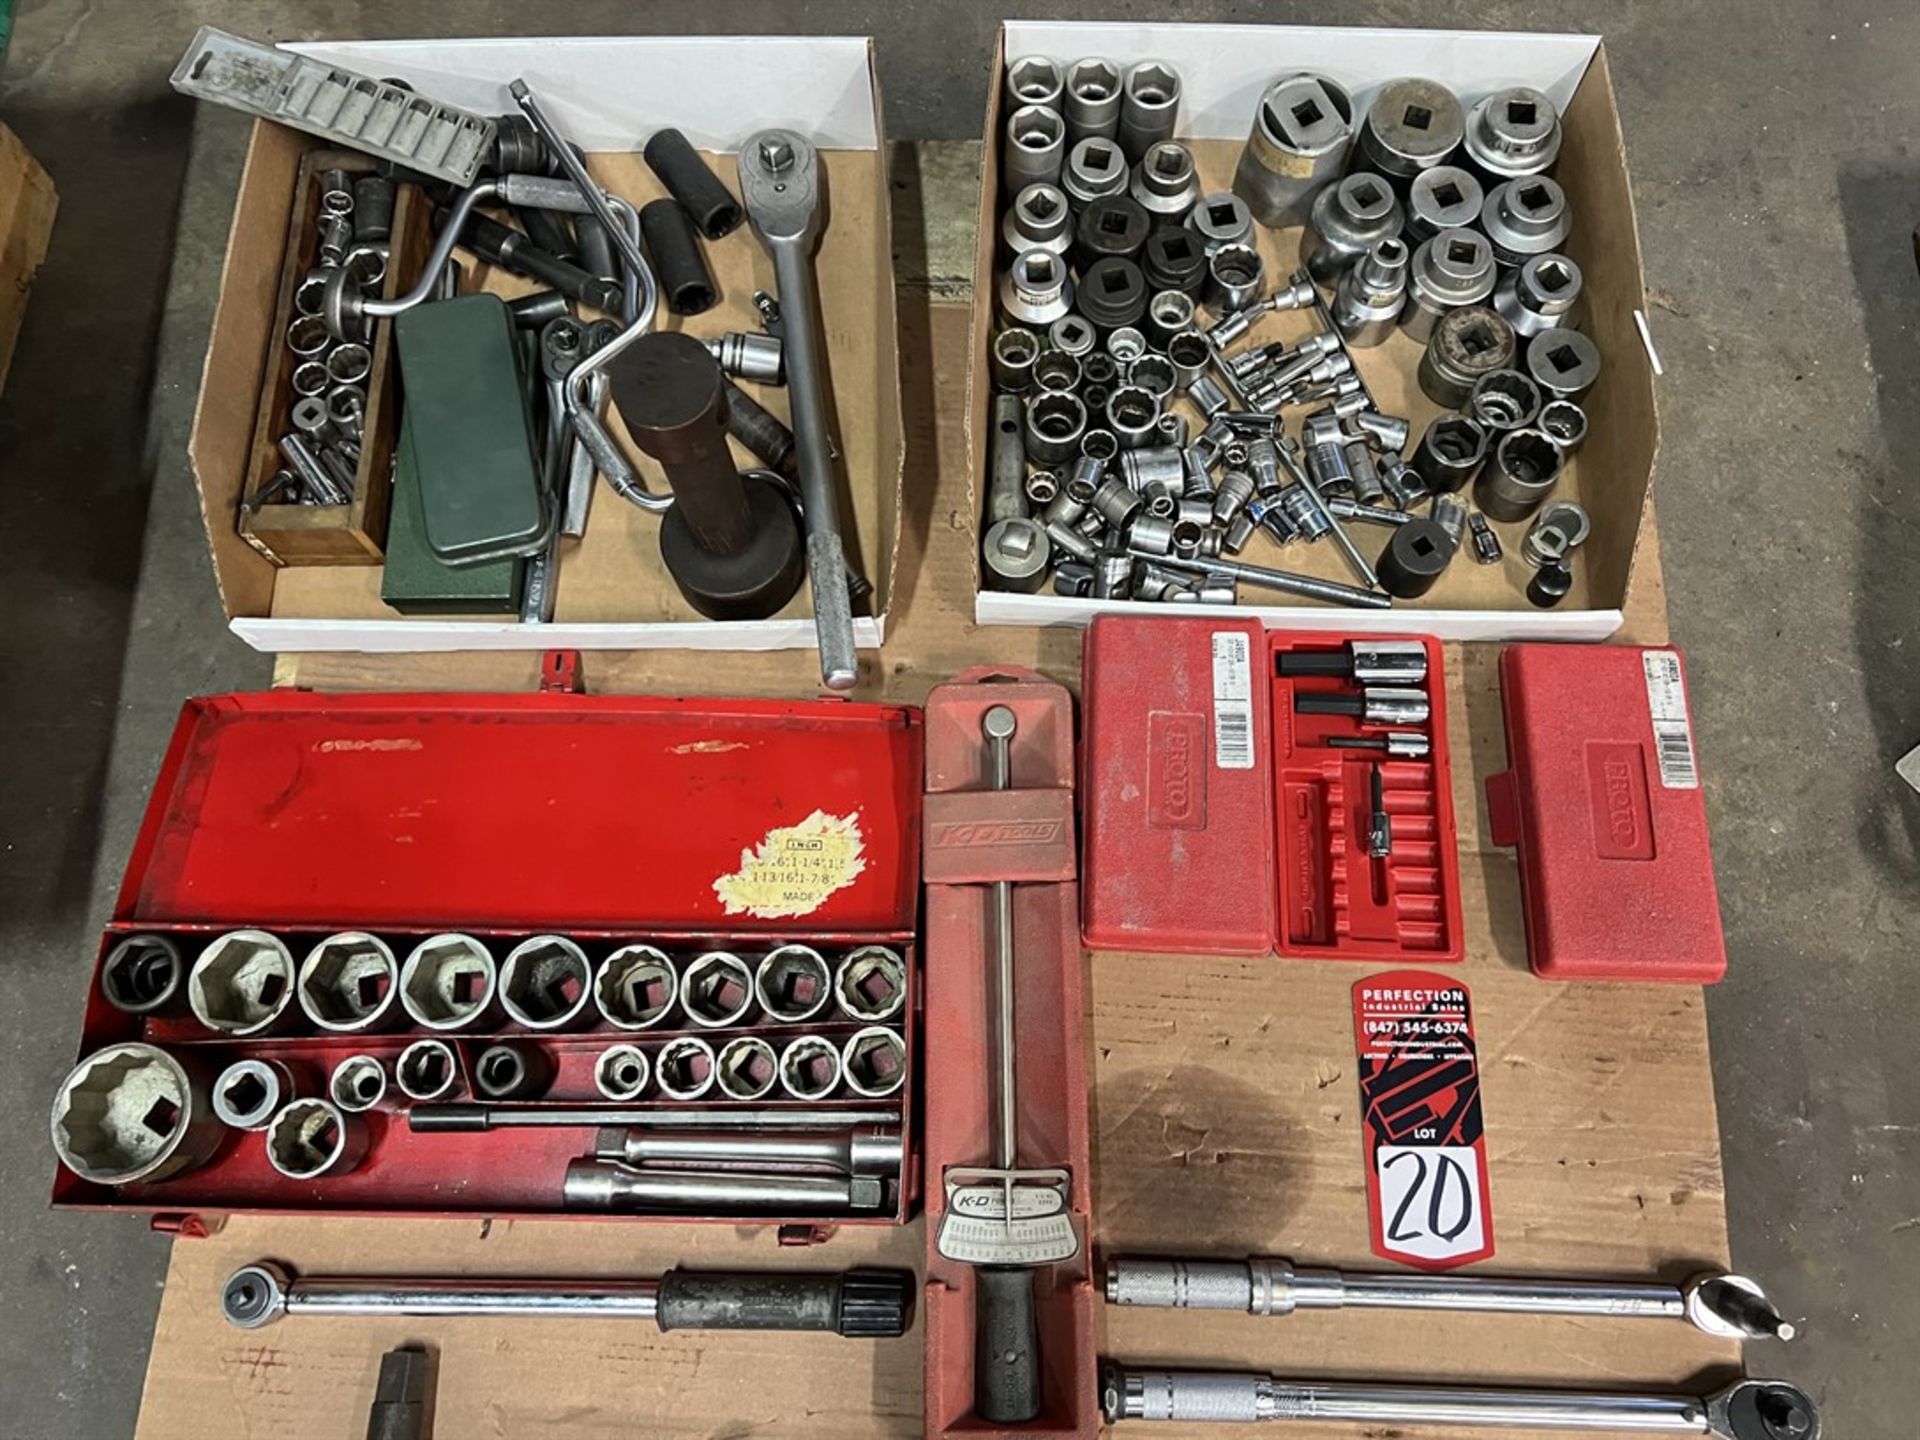 Lot of Assorted Sockets, Ratchets, and Torque Wrenches - Image 2 of 2